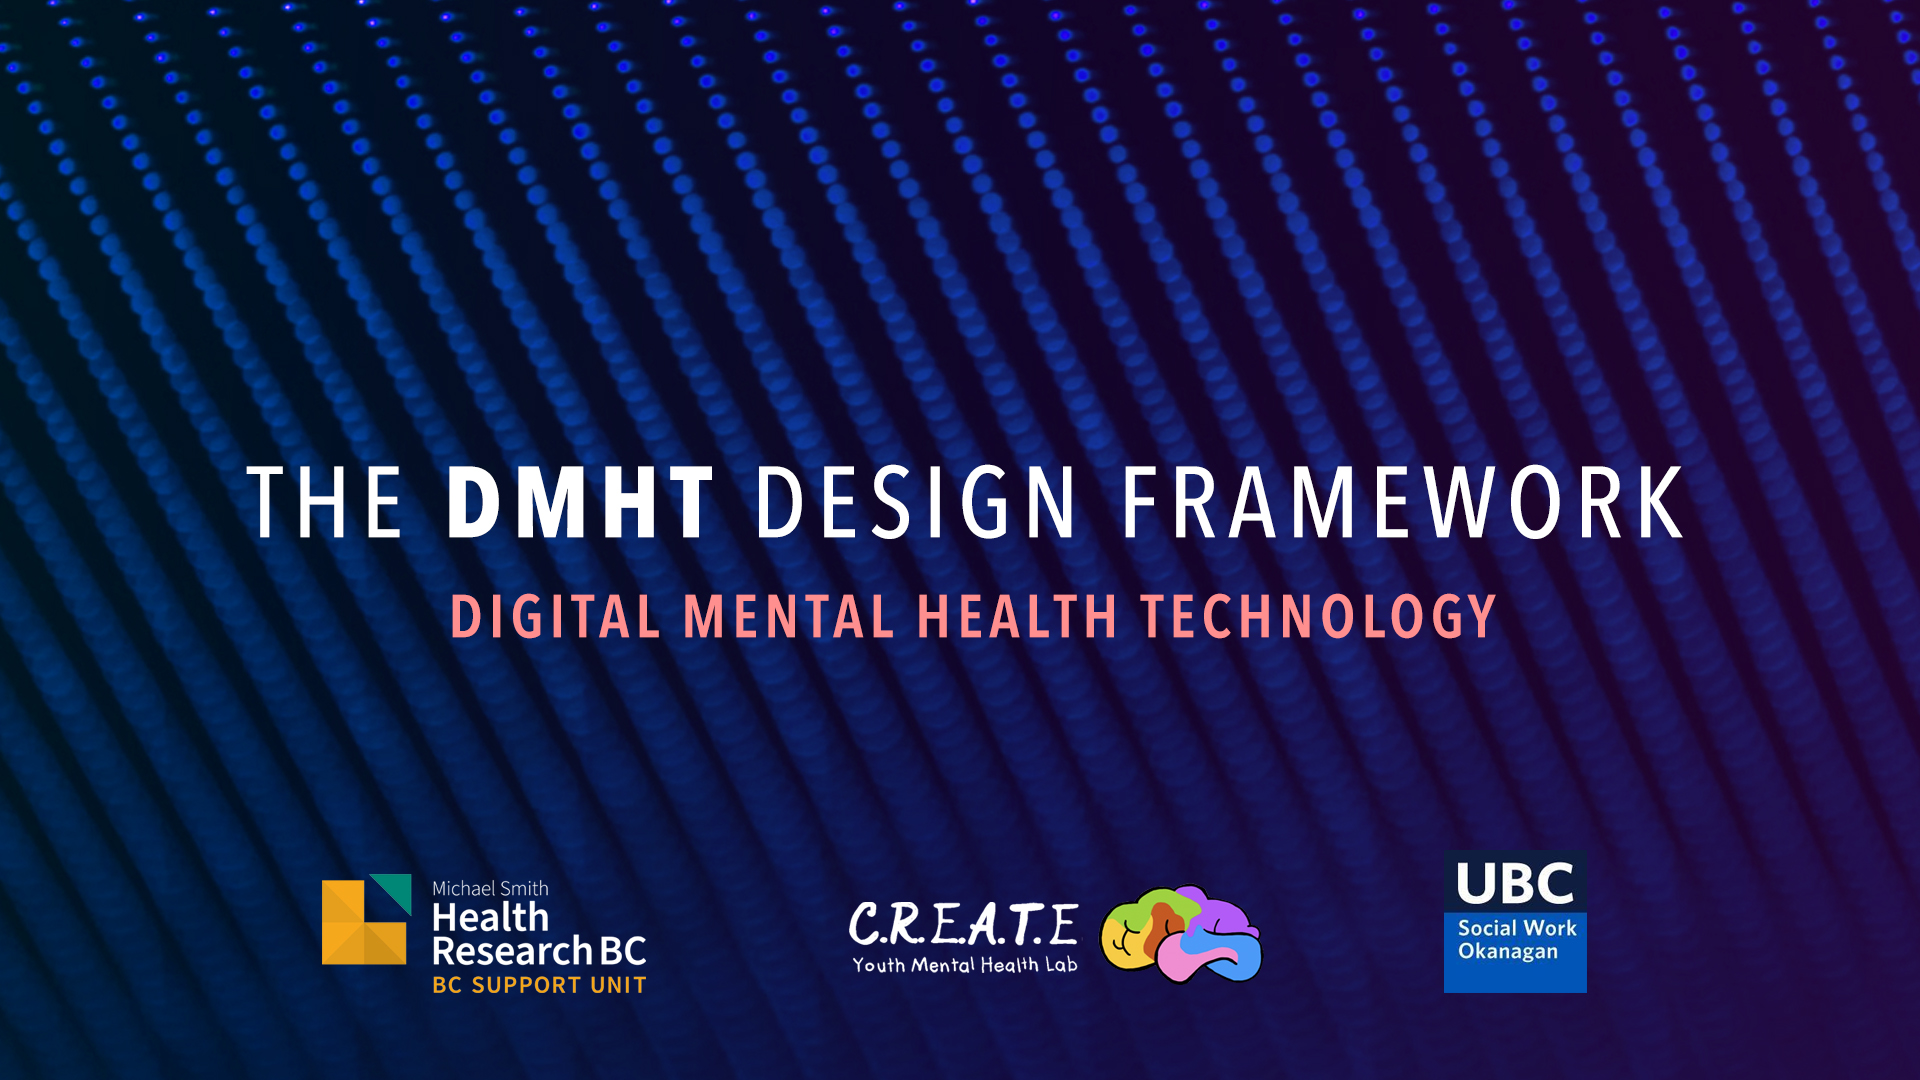 Developing a Framework to Help Design Digital Mental Health Technology for Youth: Youth Engagement Matters